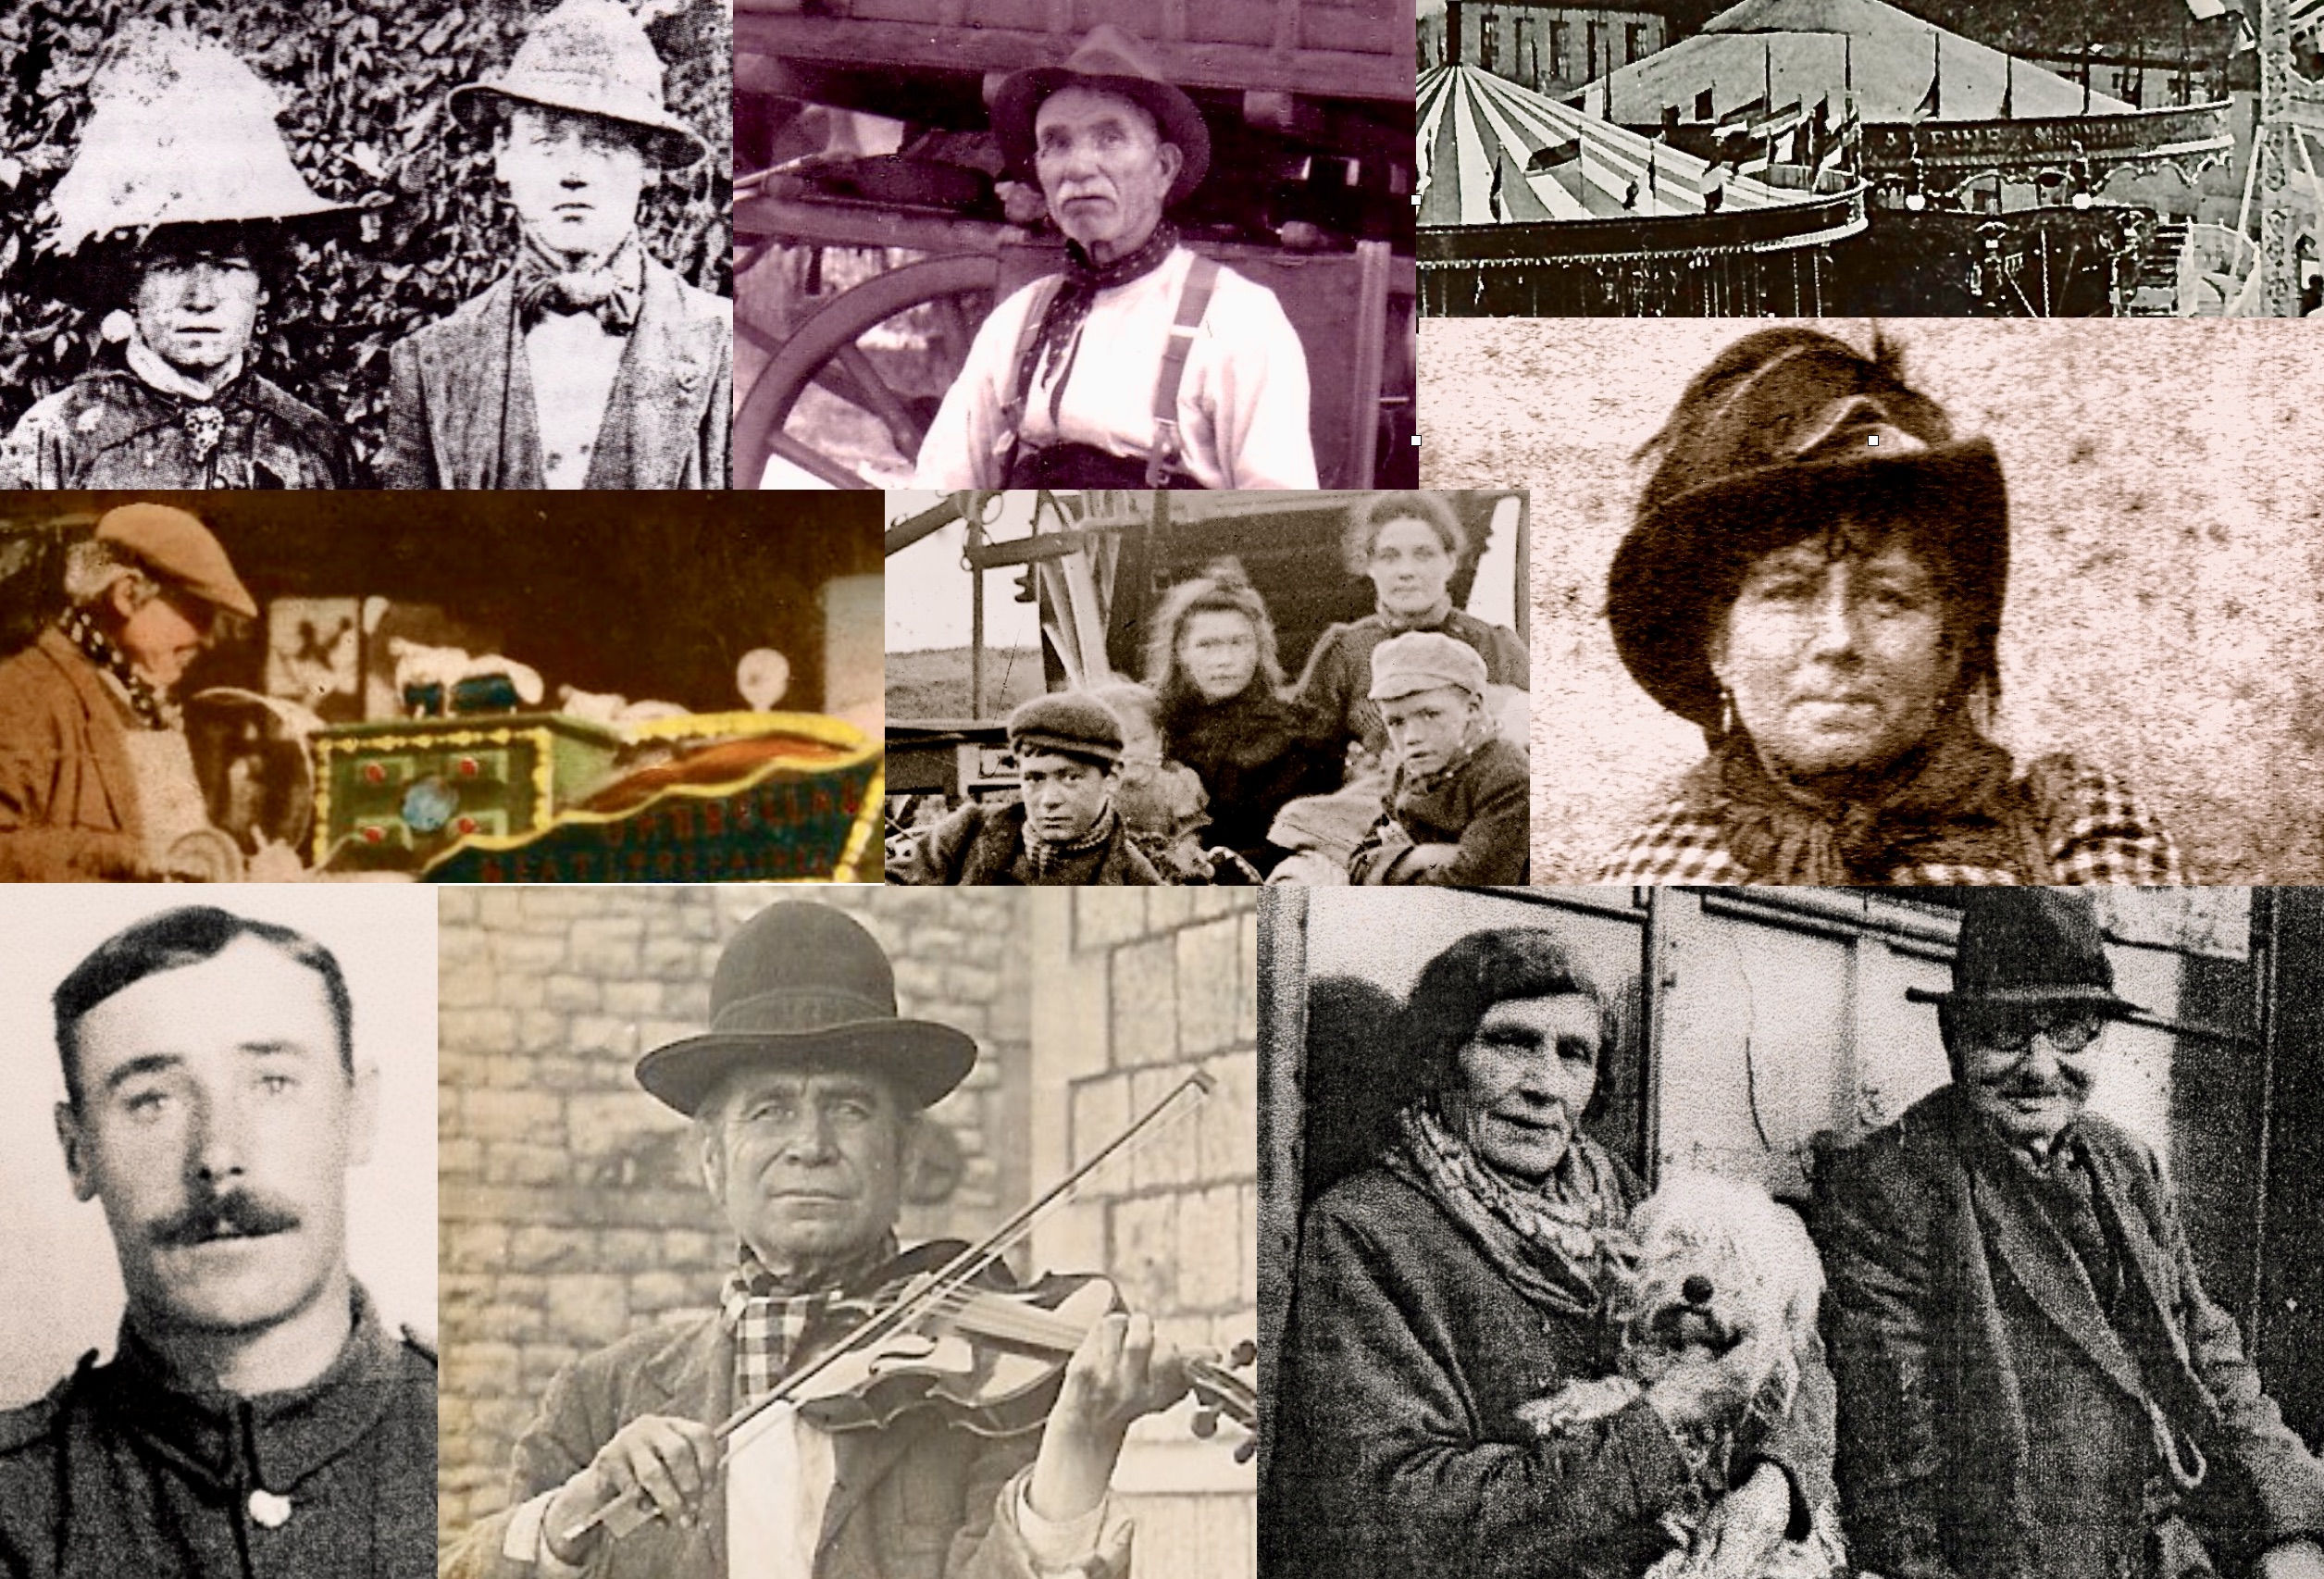 Mosaic of old photographs of people, several in hats, one playing a fiddle, another holding a dog.